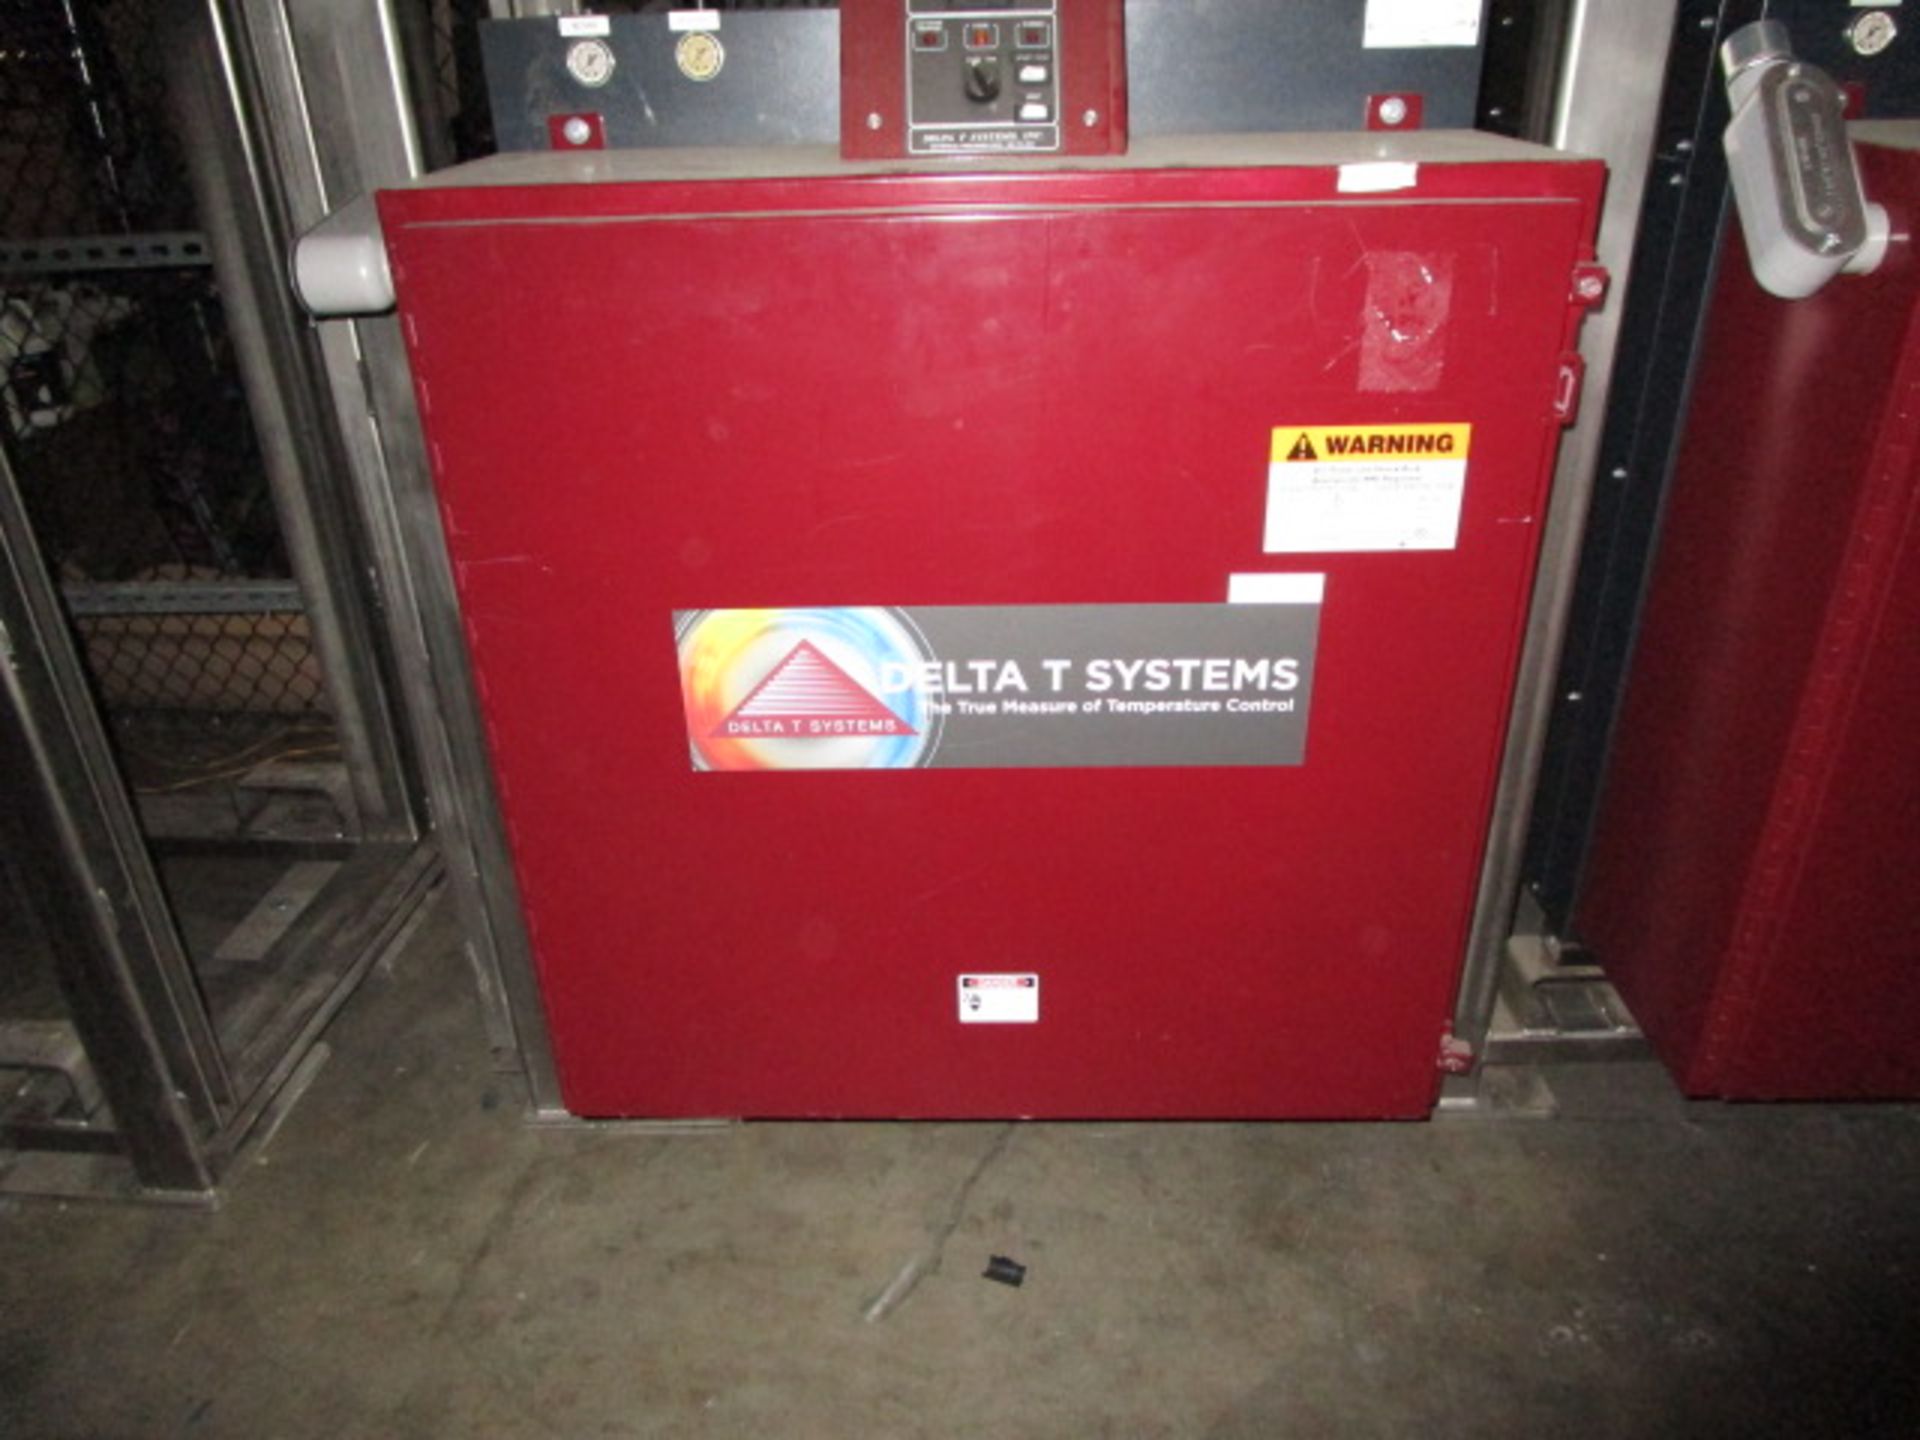 DELTA T SYSTEMS MODEL KJ471S TEMPERATURE CONTROLLER | INDUSTRIAL WATER HEATER BARELY USED & IN